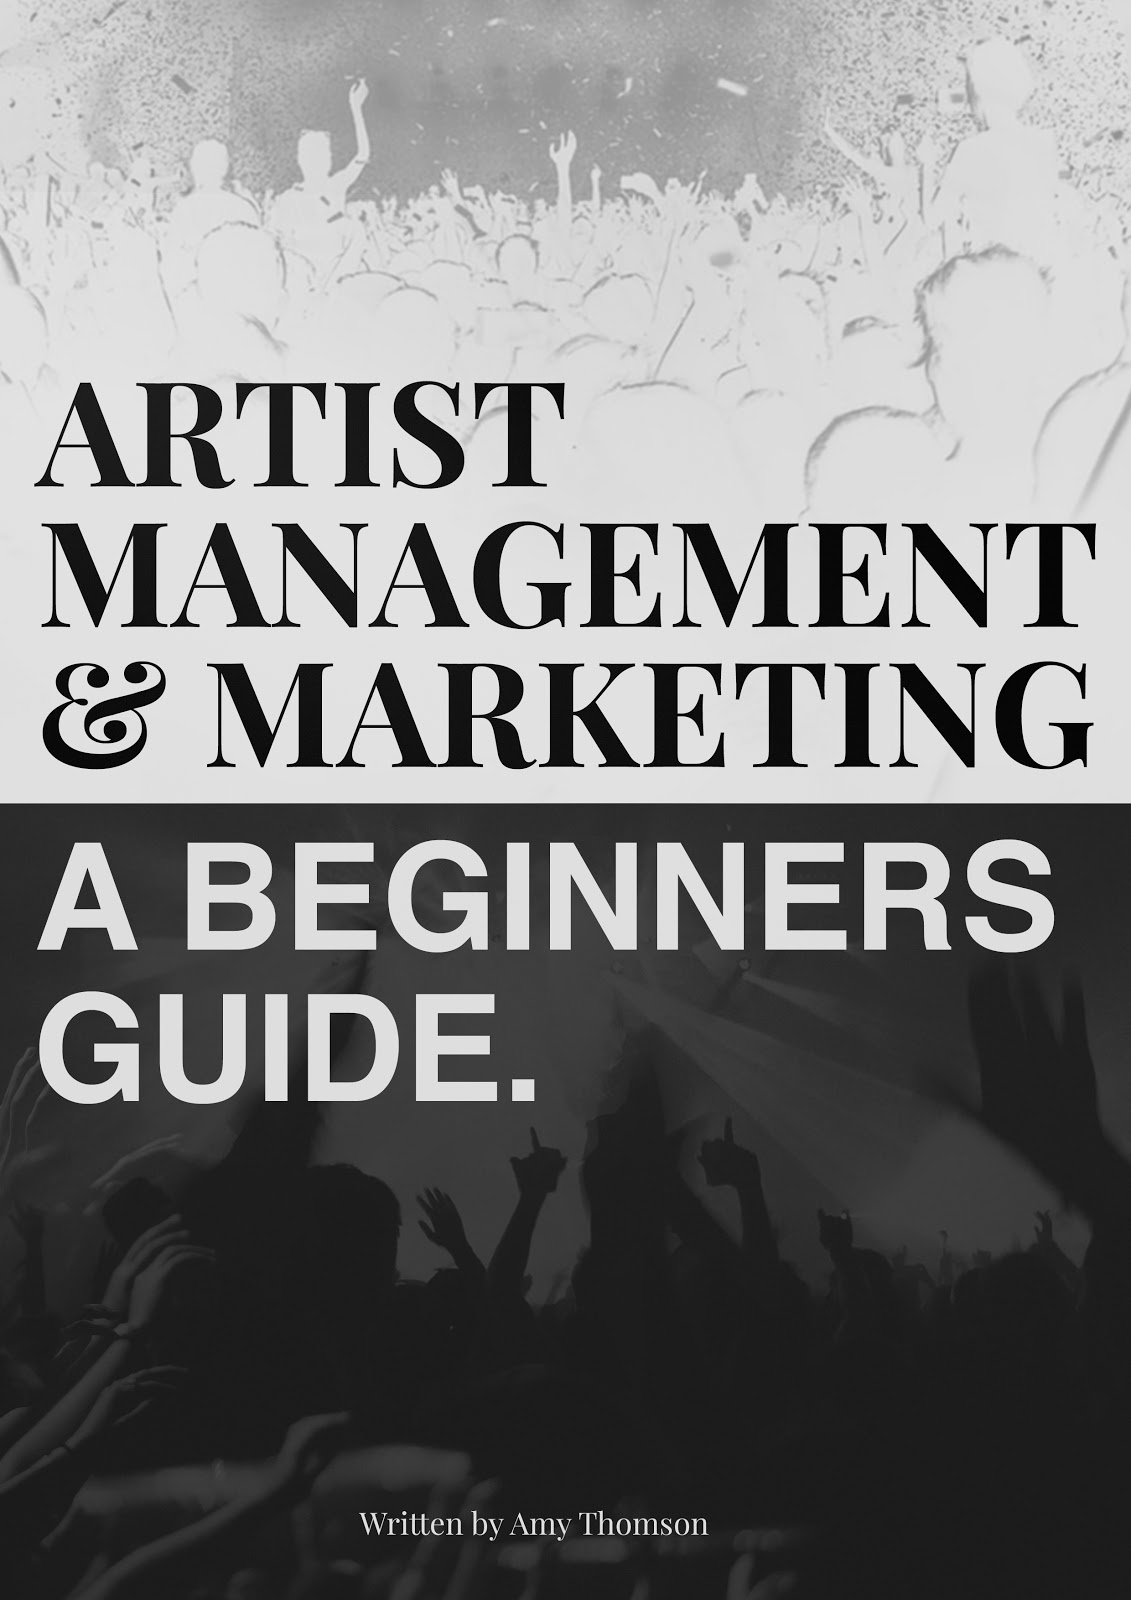 Amy Thomson presents Artist Management and Marketing, A Beginners Guide